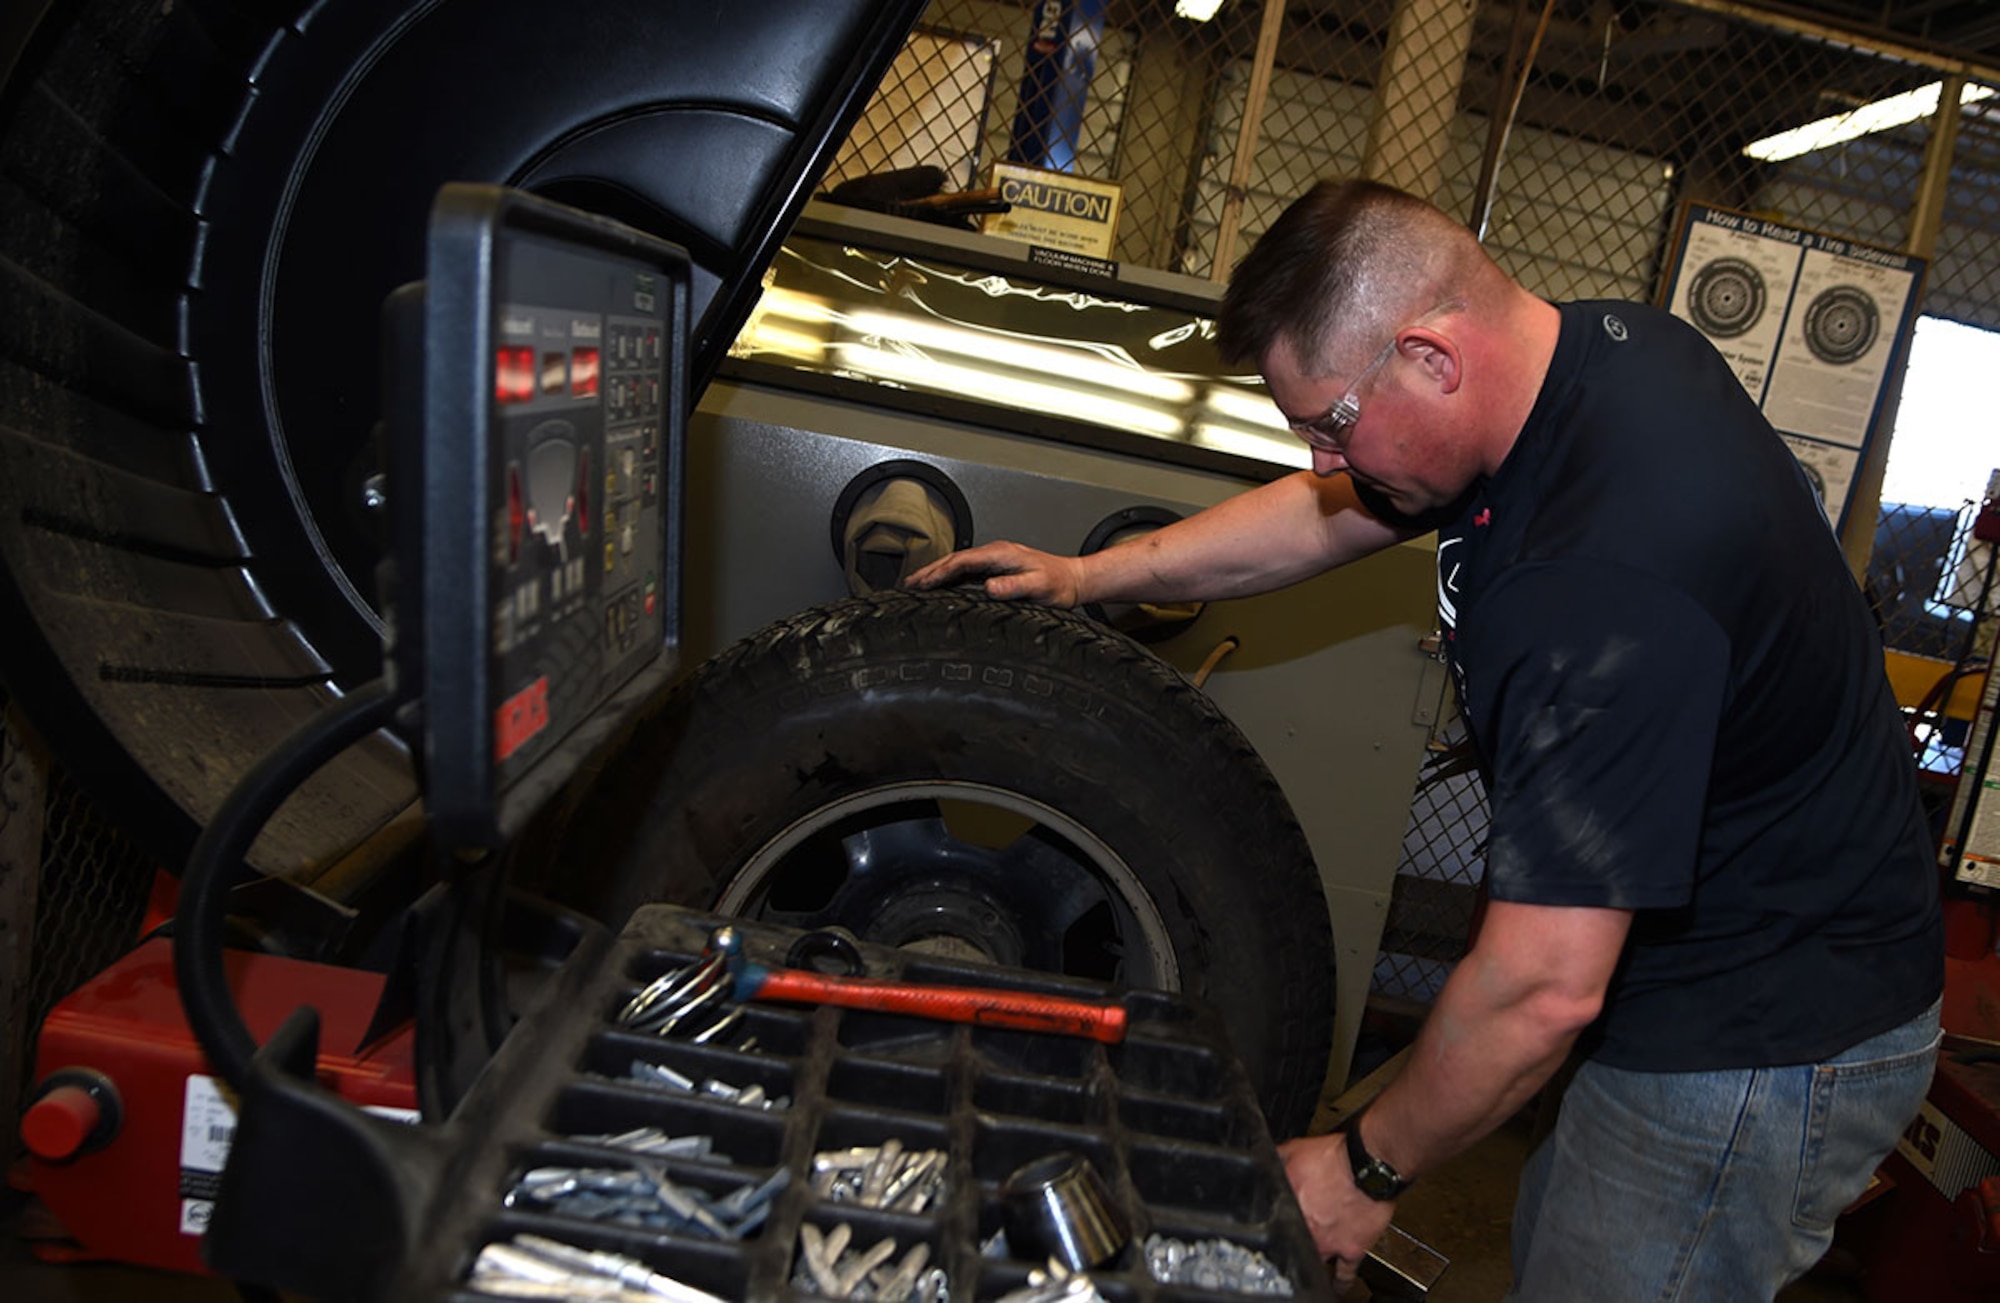 U.S. Army Sgt. Caleb Morrison, senior patrolman, uses a wheel-balancing machine at the Auto Skills Center on Joint Base Elmendorf-Richardson, Alaska, April 14, 2016. Balancing should be done every time you purchase a new set of tires or change out winter tires to summer tires using the same set of rims. Morrison is attached to the 545th Military Police Company, 6th Brigade Engineer Battalion (Airborne), 4th Infantry Brigade Combat Team (Airborne), 25th Infantry Division. (U.S. Air Force photo by Staff Sgt. Sheila deVera)